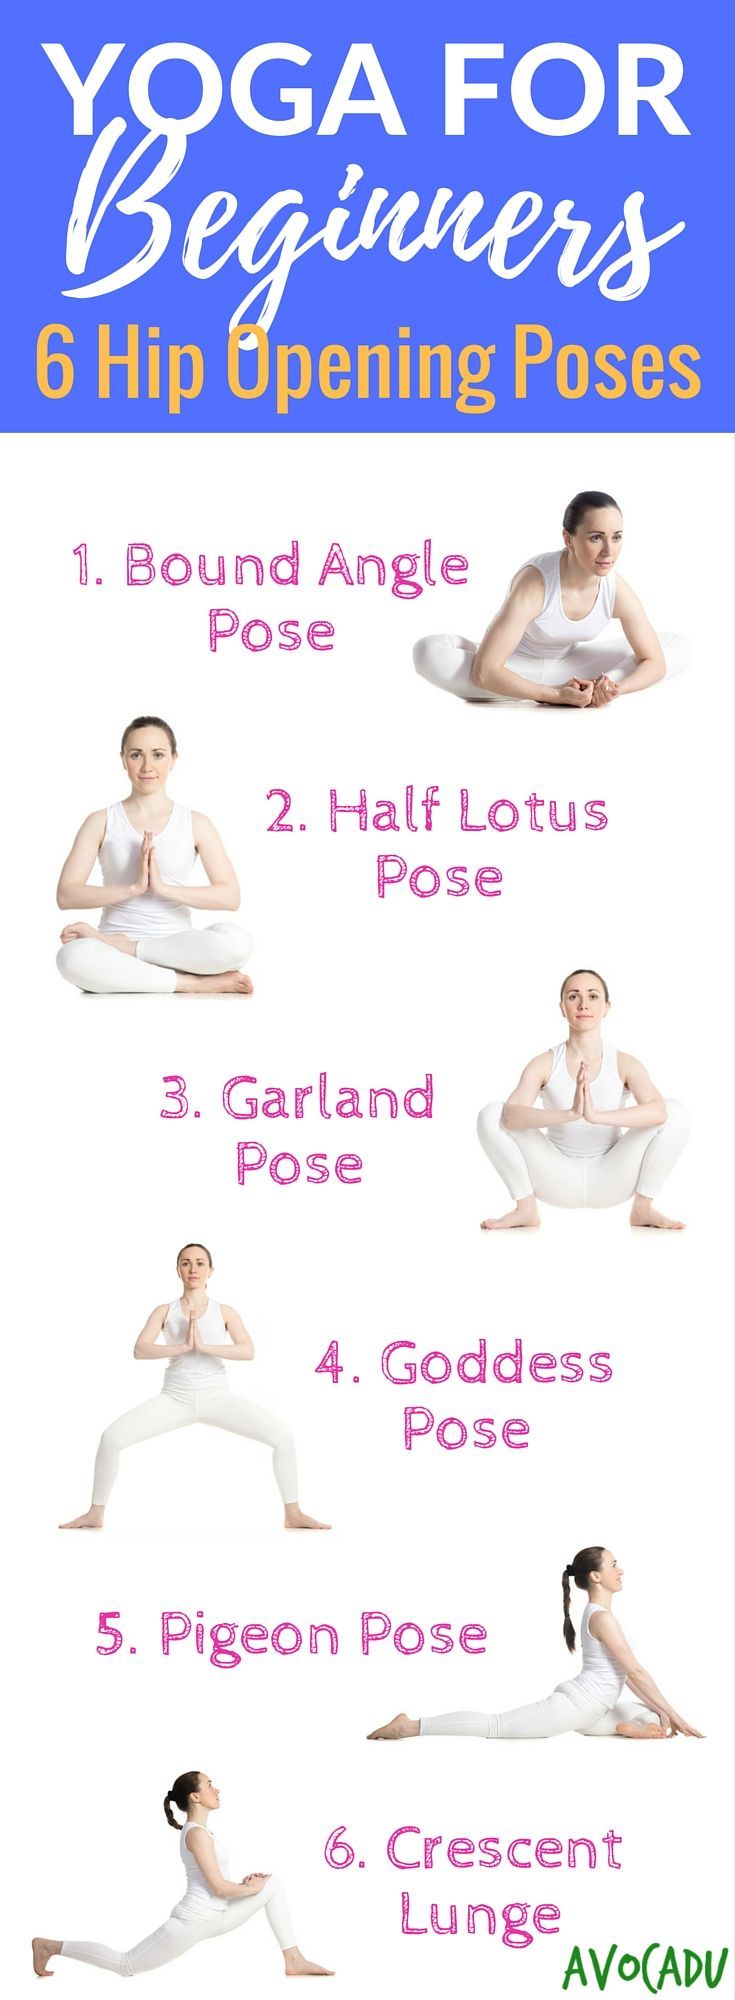 These yoga poses for beginners will help to relieve lower back pain, increase fl...